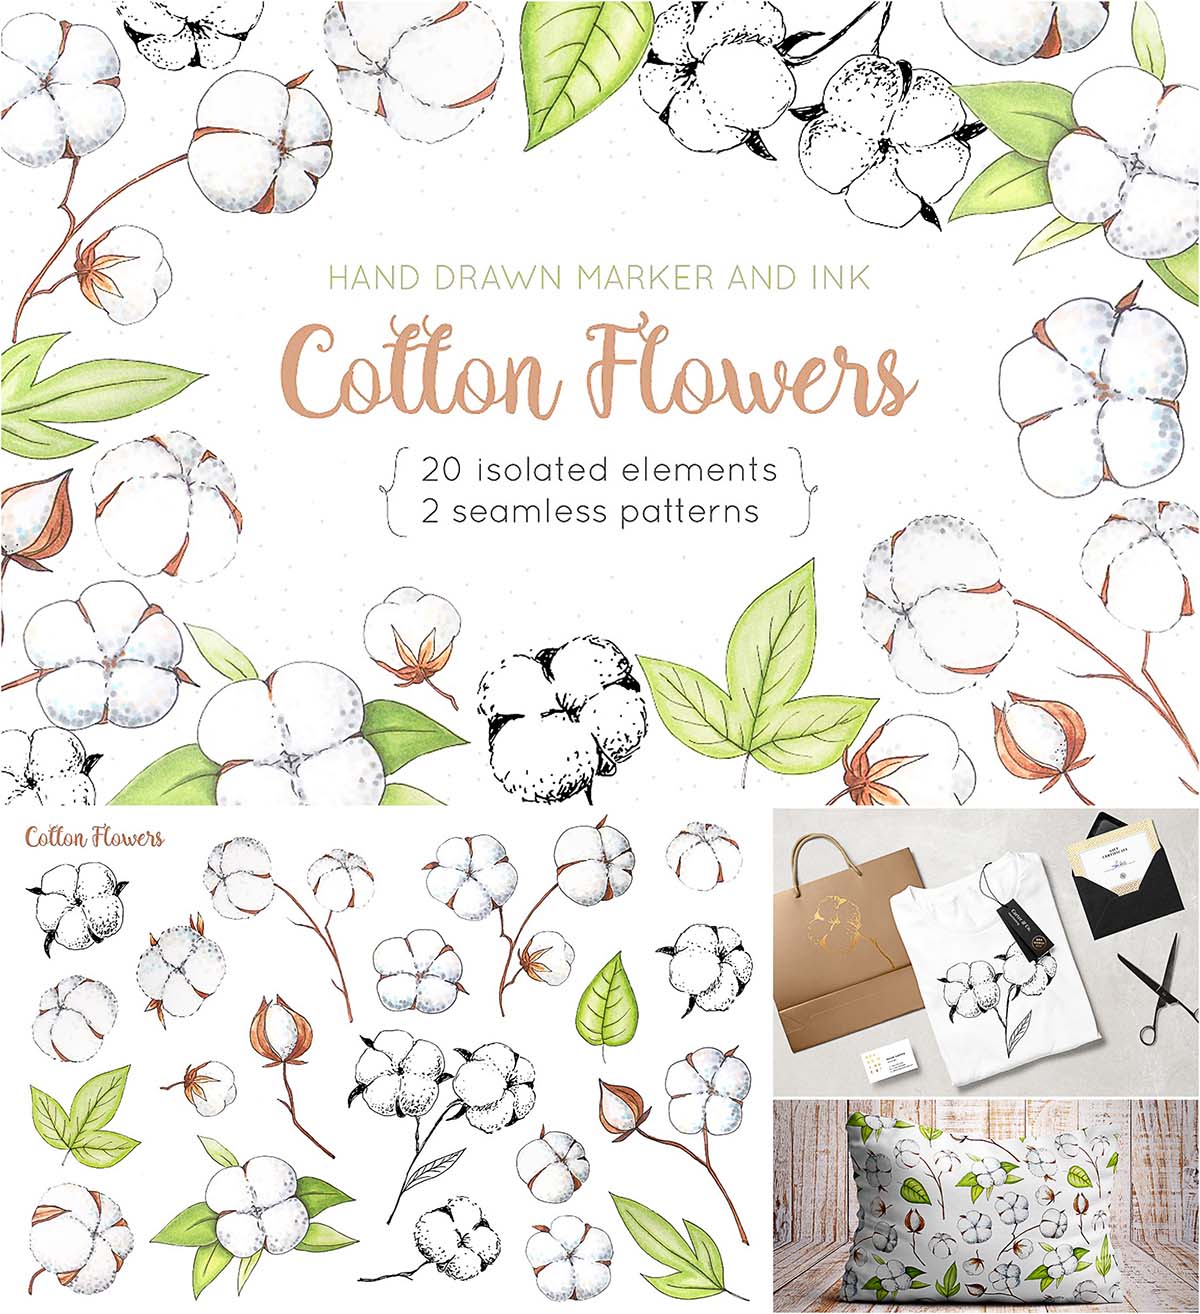 Cotton flowers illustrations and patterns set